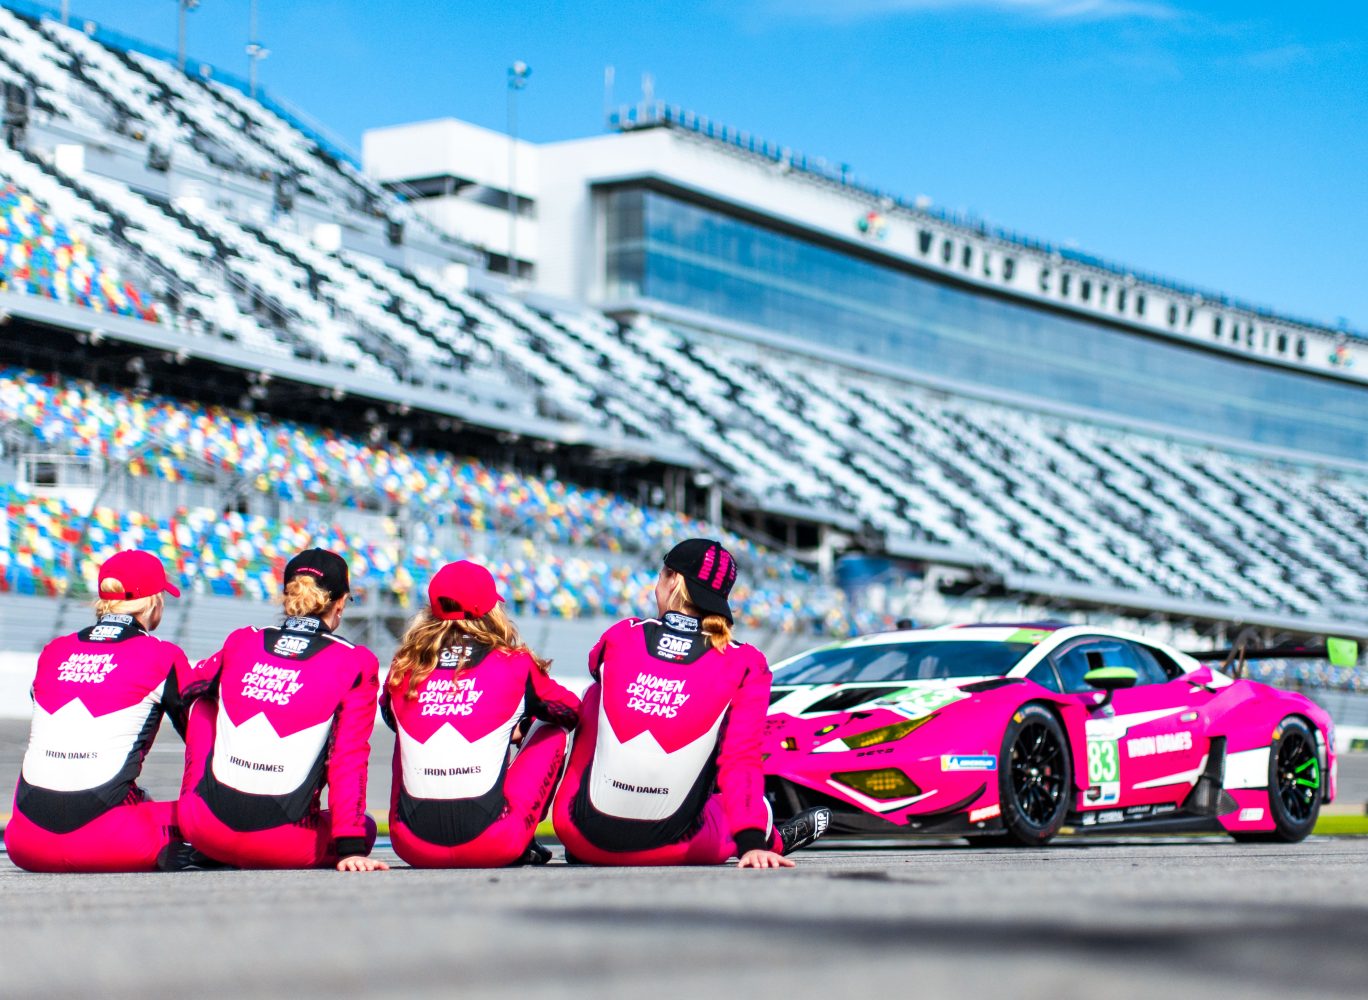 IRON DAMES SECURES REMARKABLE SIXTH-PLACE FINISH IN DAYTONA 24 HOURS